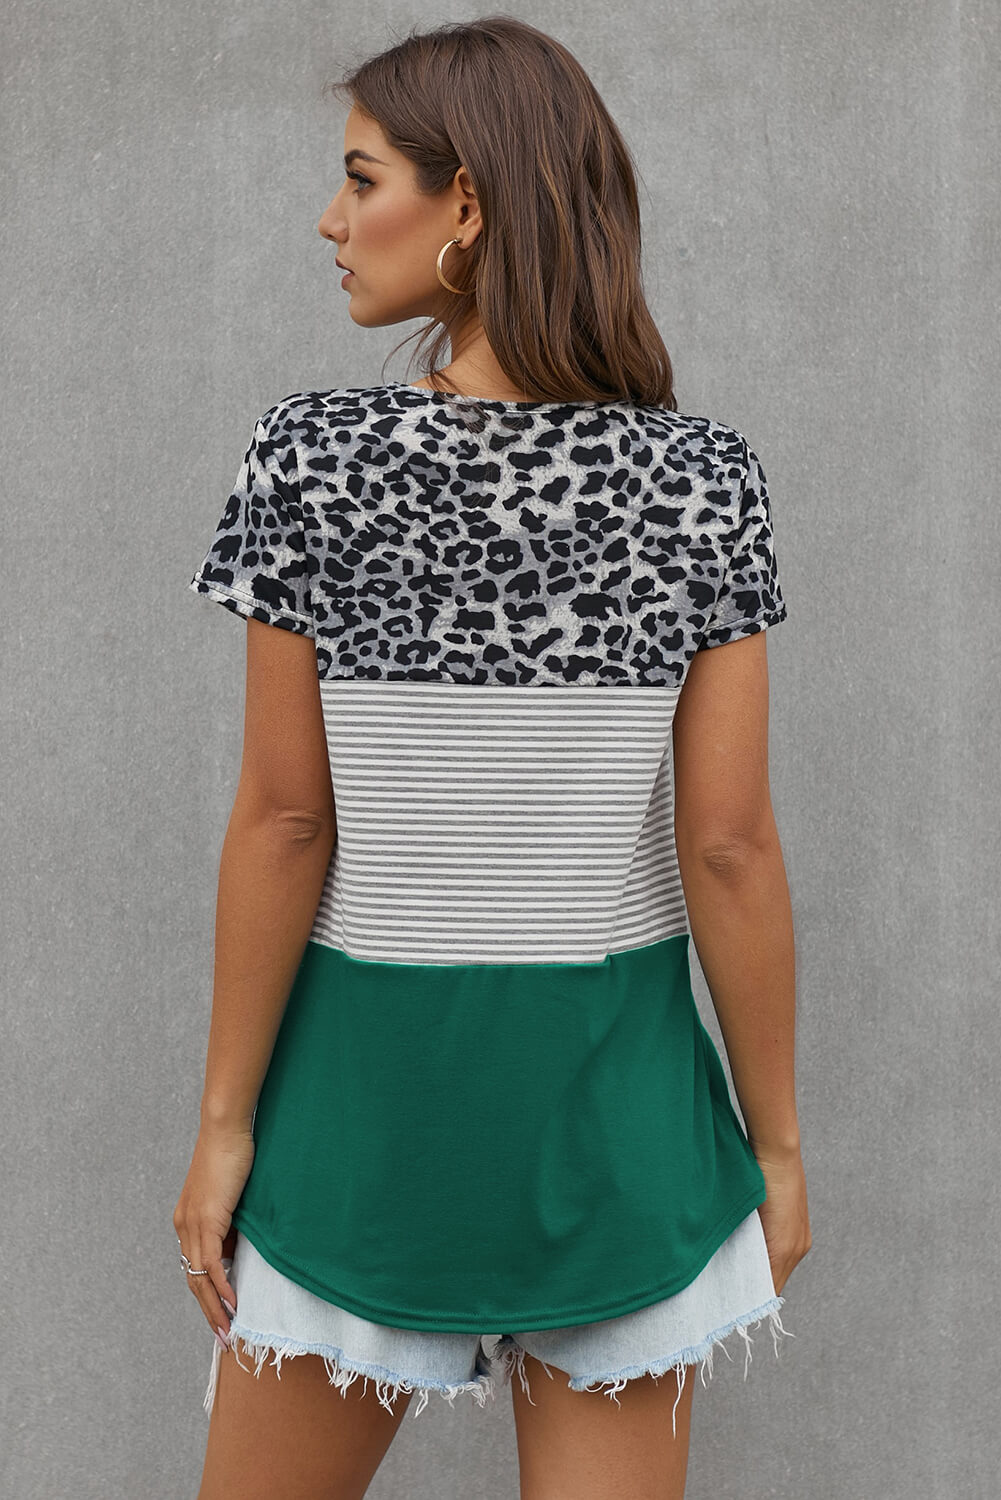 Meselling99 Green Block Striped and Leopard Short Sleeve Tee--Free Shipping at meselling99